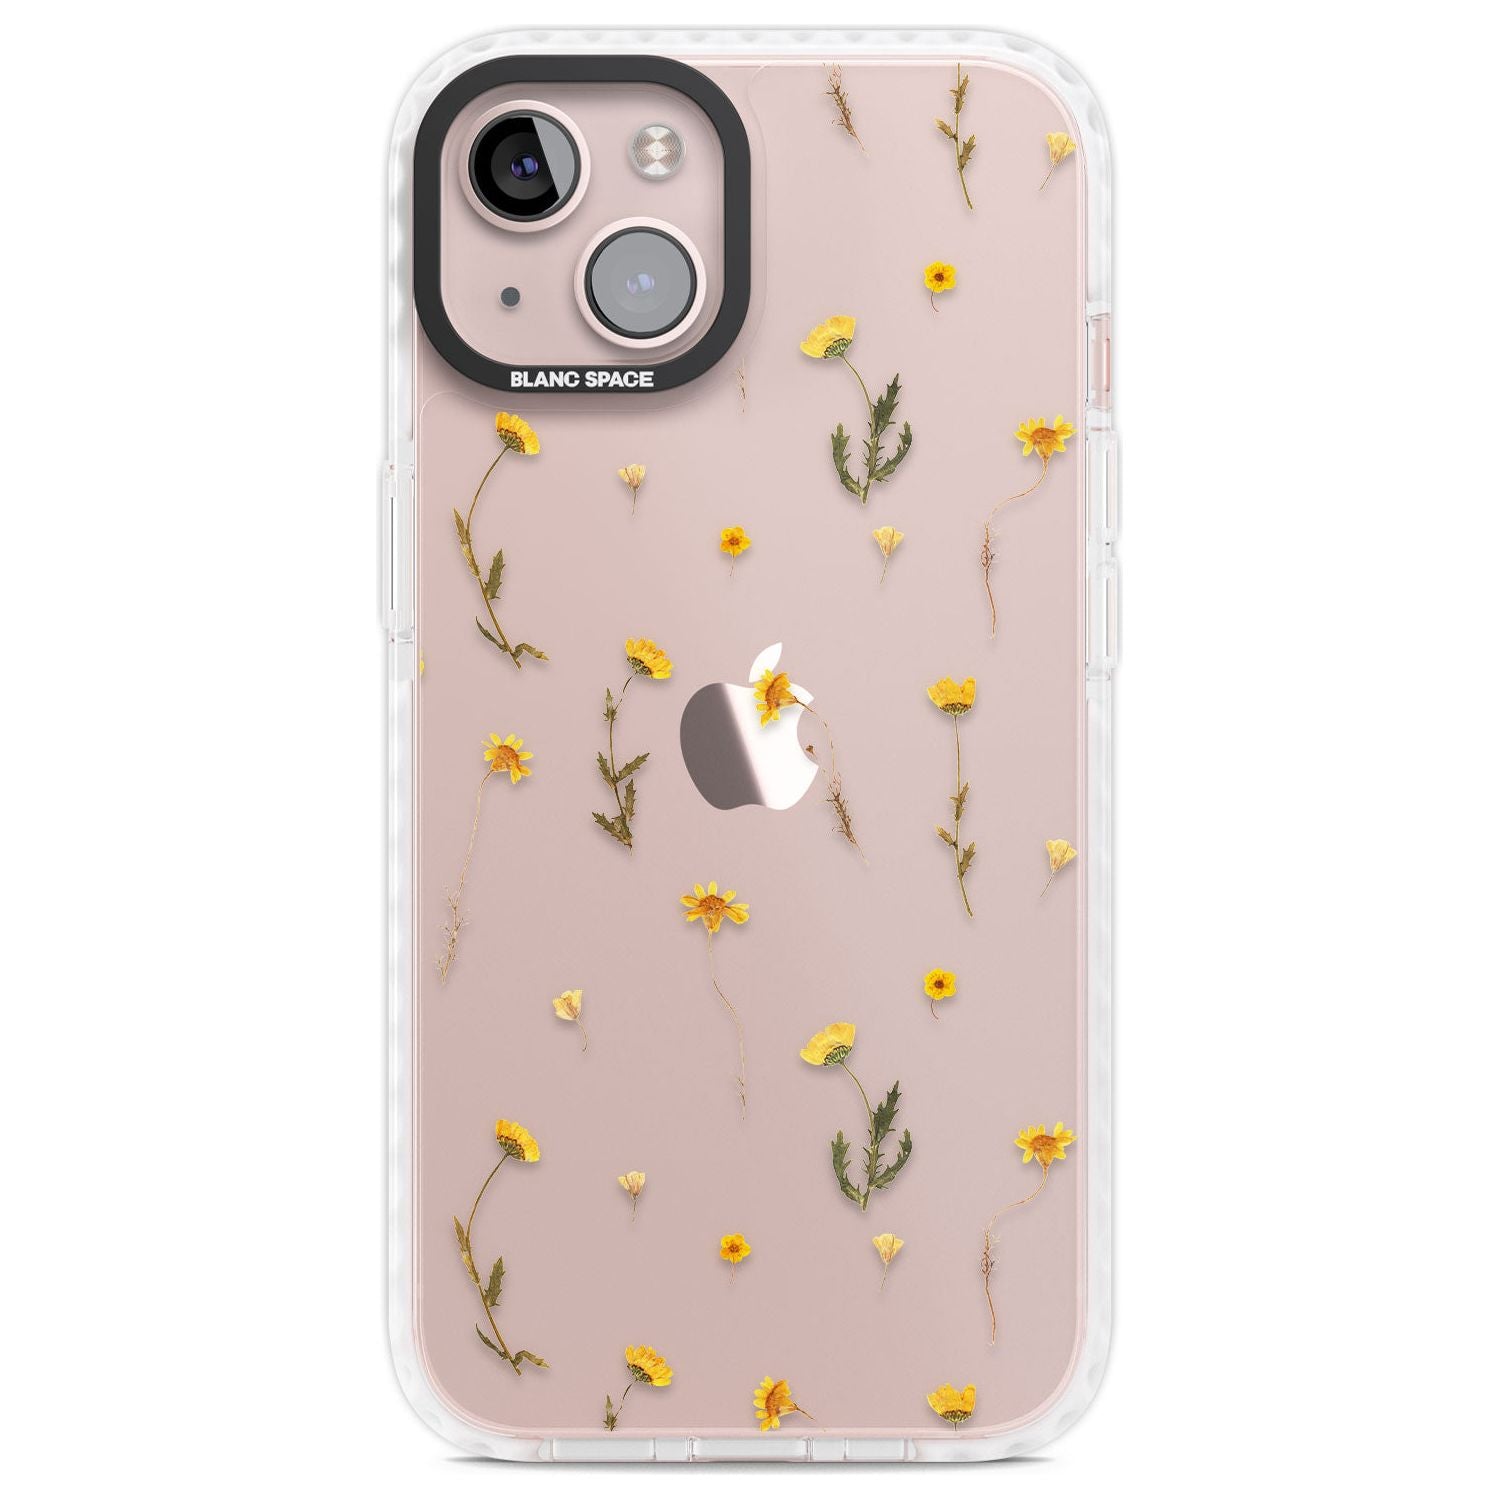 Mixed Yellow Flowers - Dried Flower-Inspired Phone Case iPhone 13 / Impact Case,iPhone 14 / Impact Case,iPhone 15 Plus / Impact Case,iPhone 15 / Impact Case Blanc Space